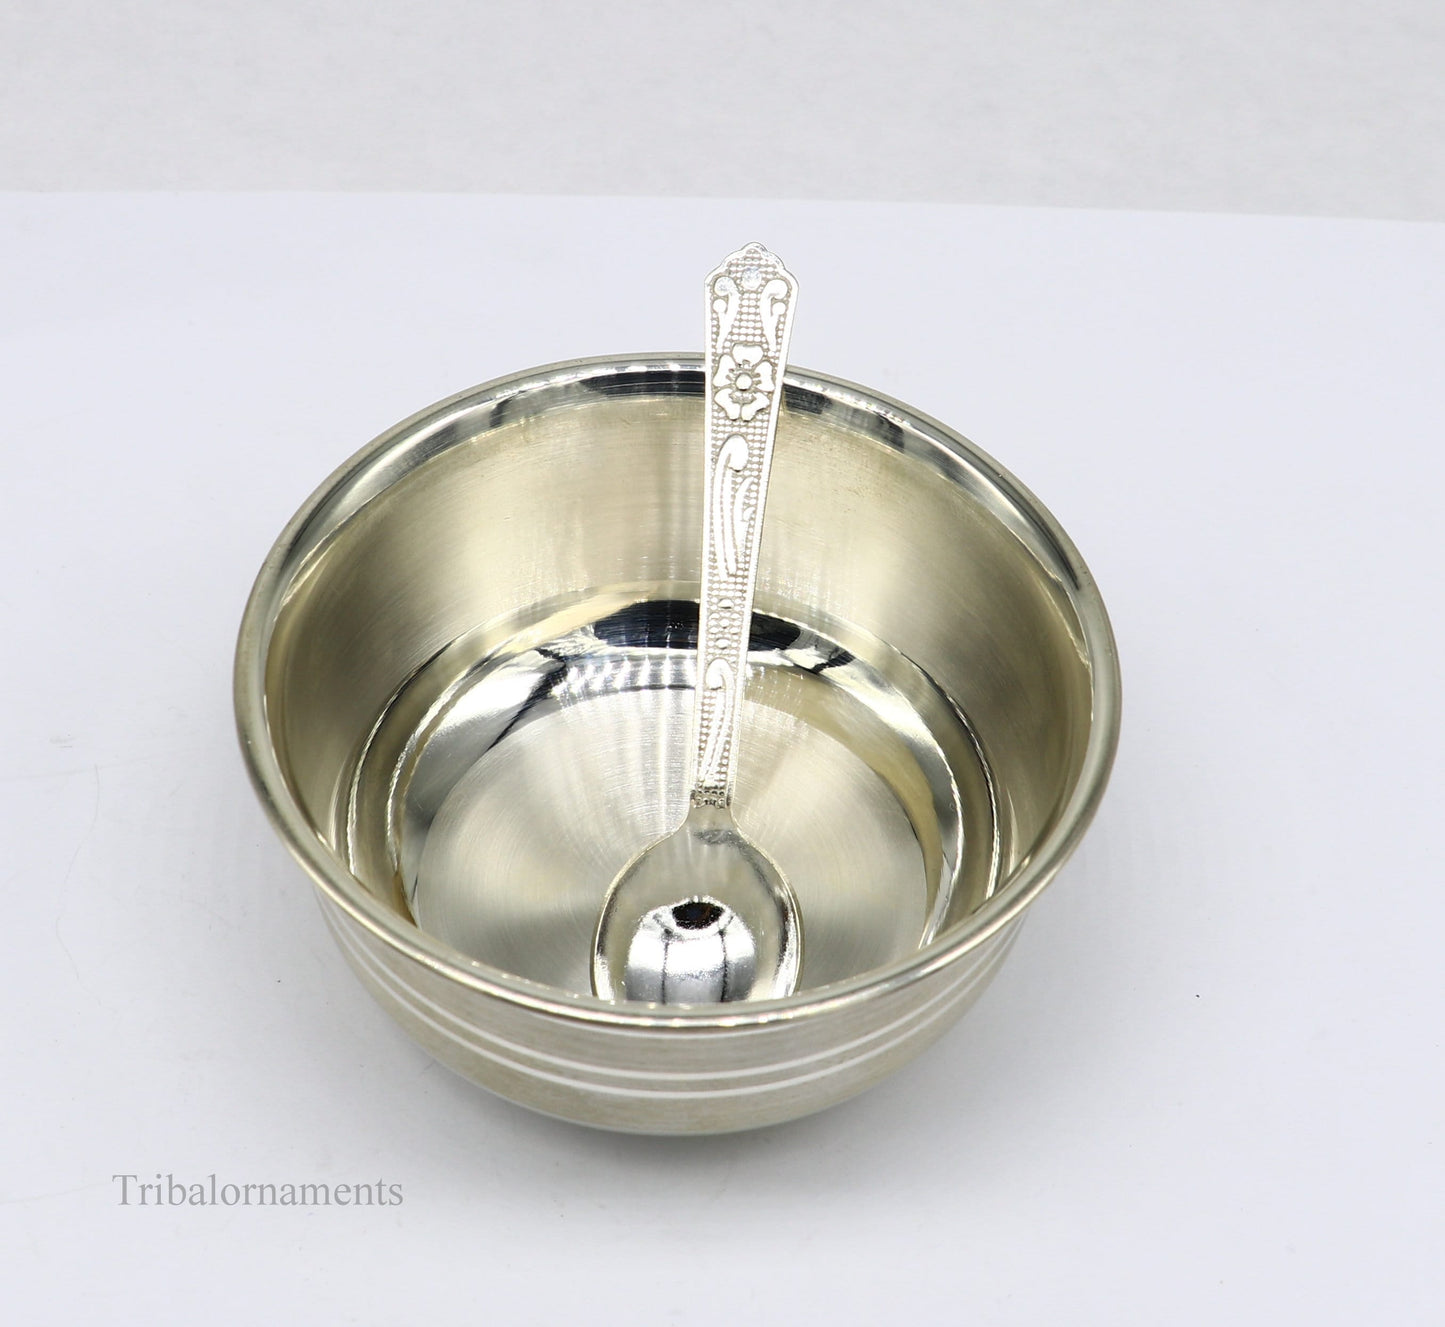 999 fine solid silver handmade small bowl for baby serving, pure silver vessel, silver utensils, home kitchen accessories puja bowl sv226 - TRIBAL ORNAMENTS